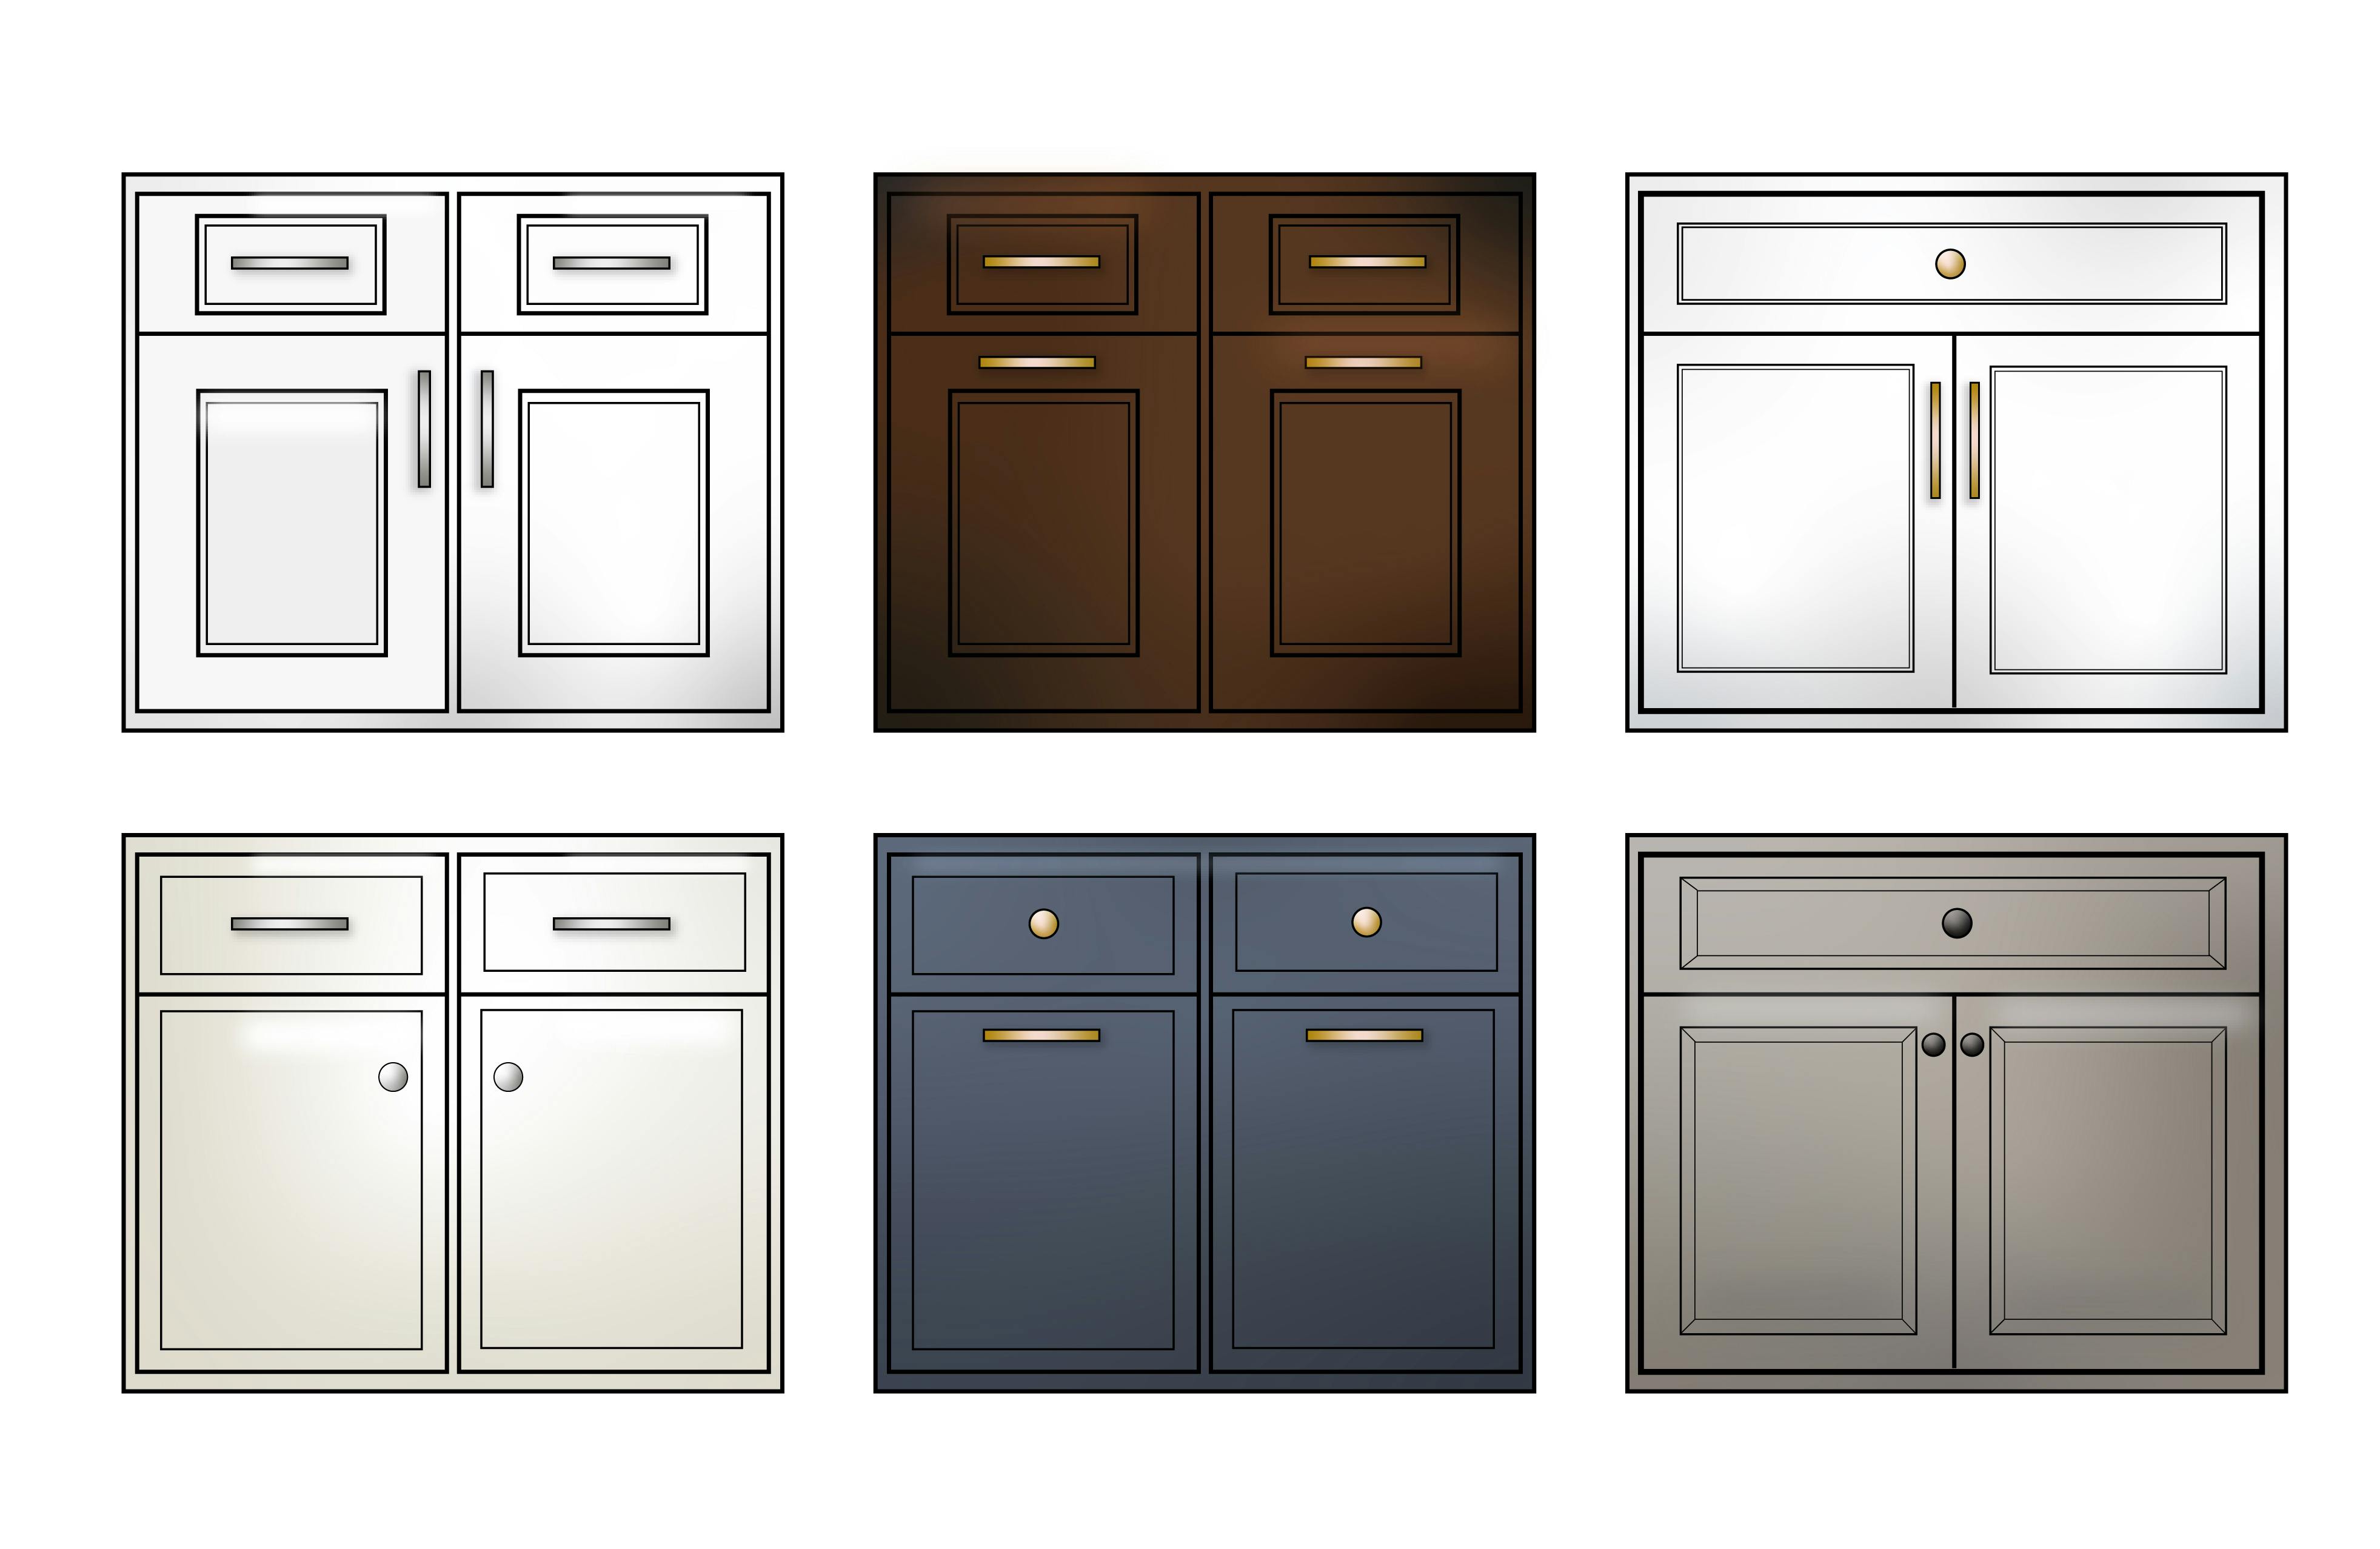 Should You Choose Knobs or Pulls for Your Cabinets?